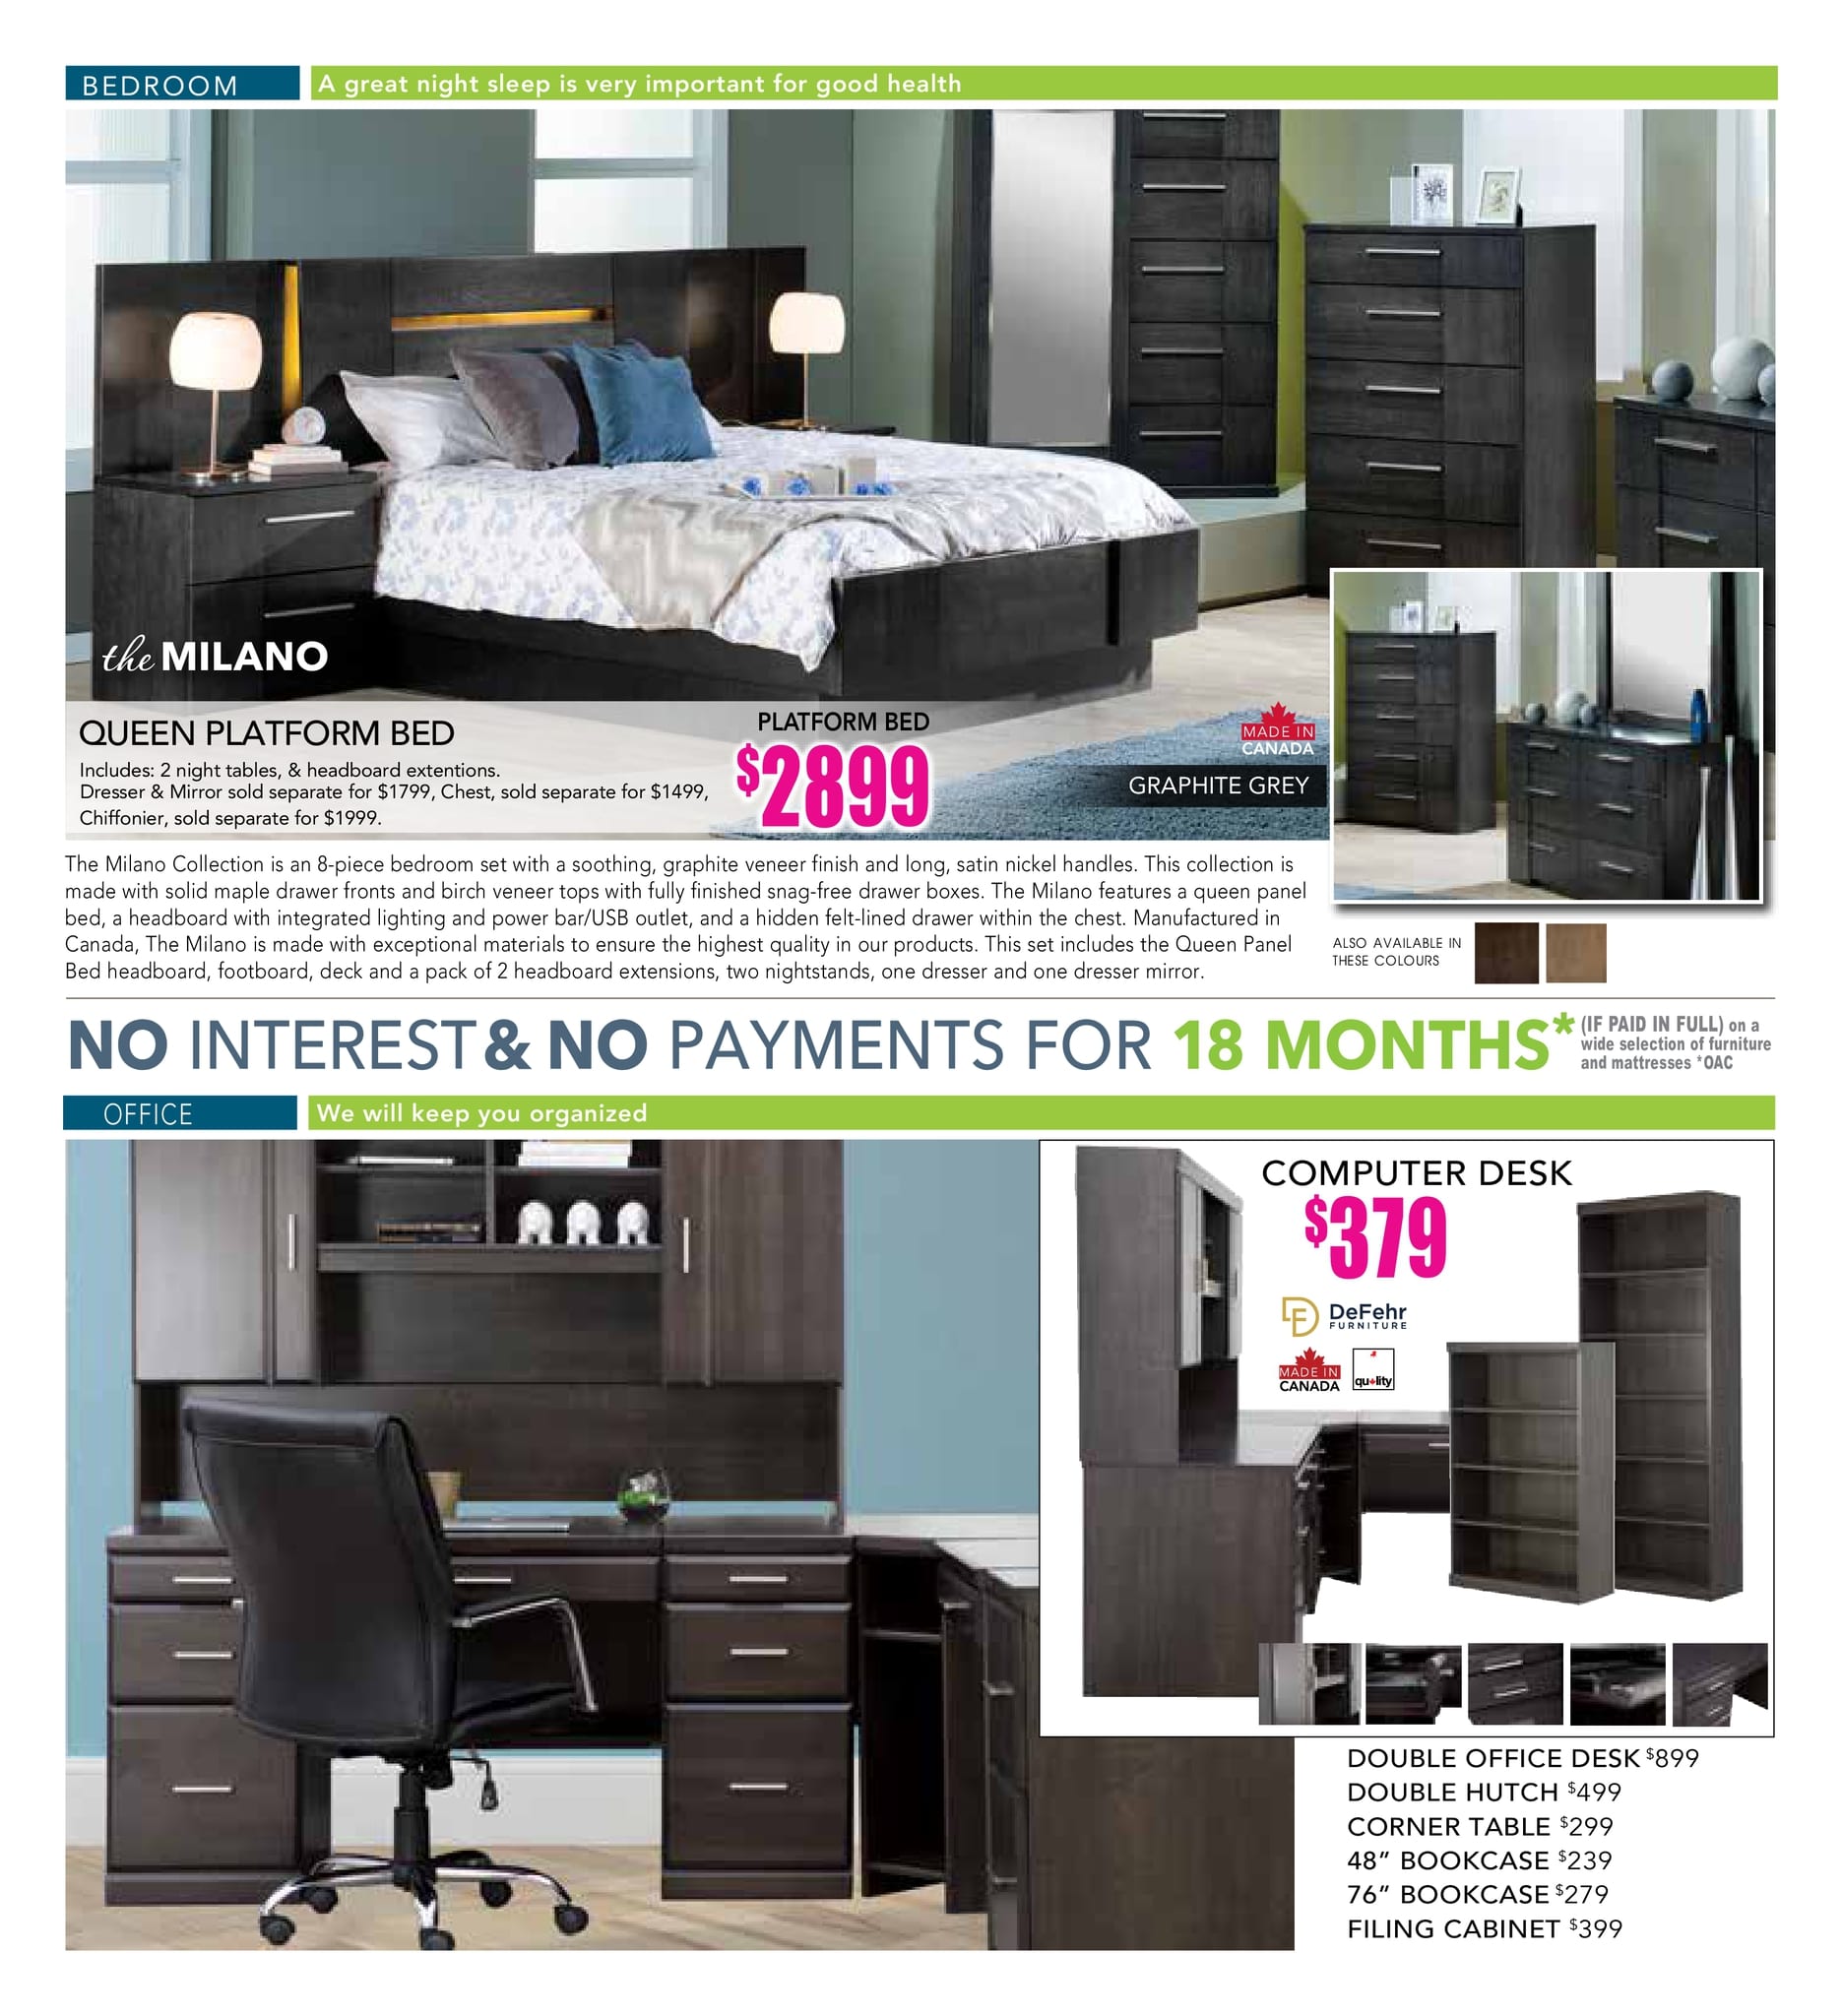 Hotchkiss Home Furnishings - Monthly Savings - Page 6